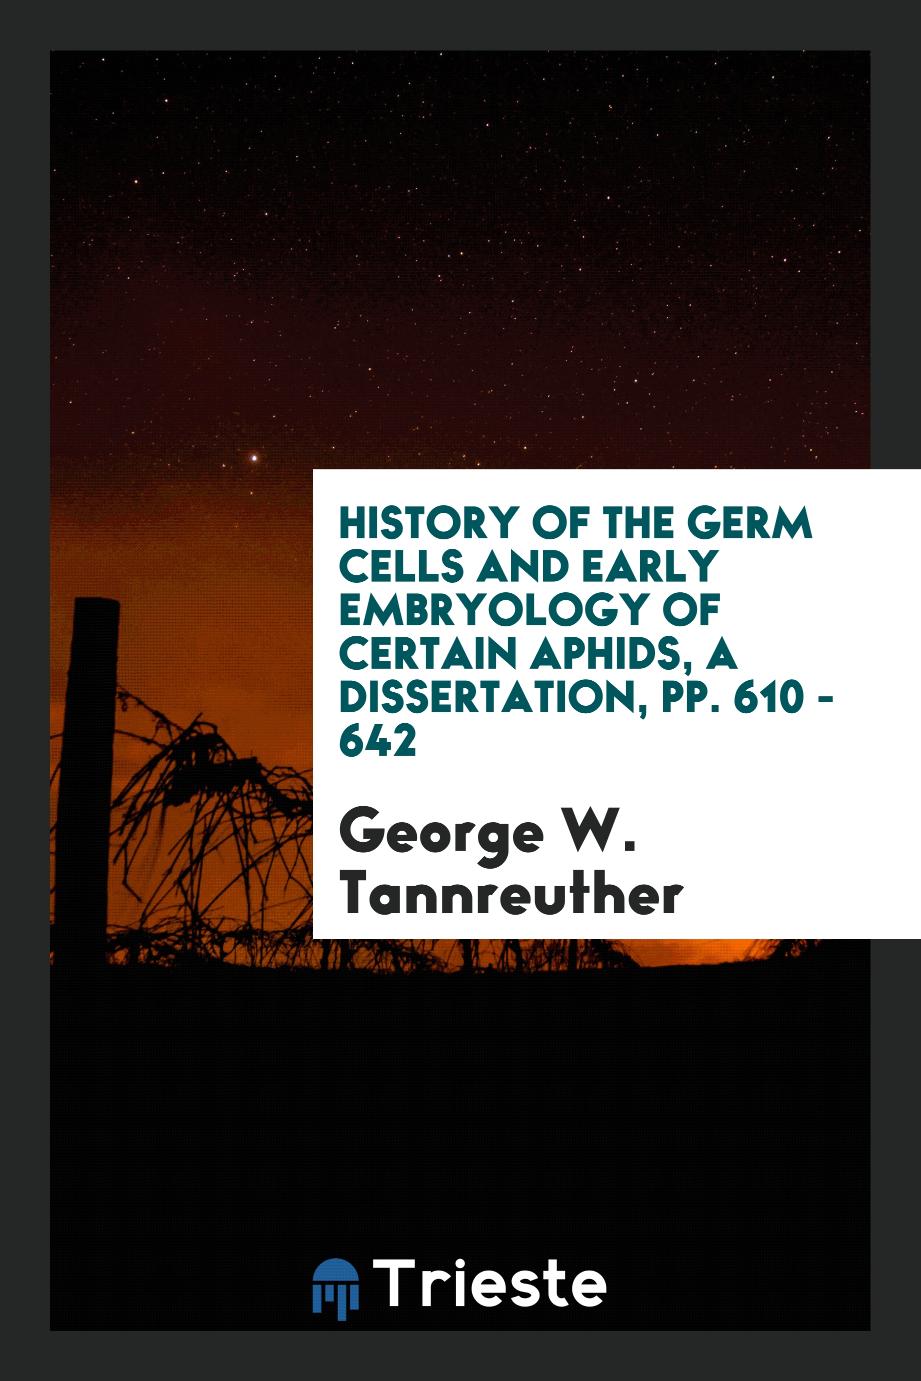 History of the germ cells and early embryology of certain aphids, a dissertation, pp. 610 - 642